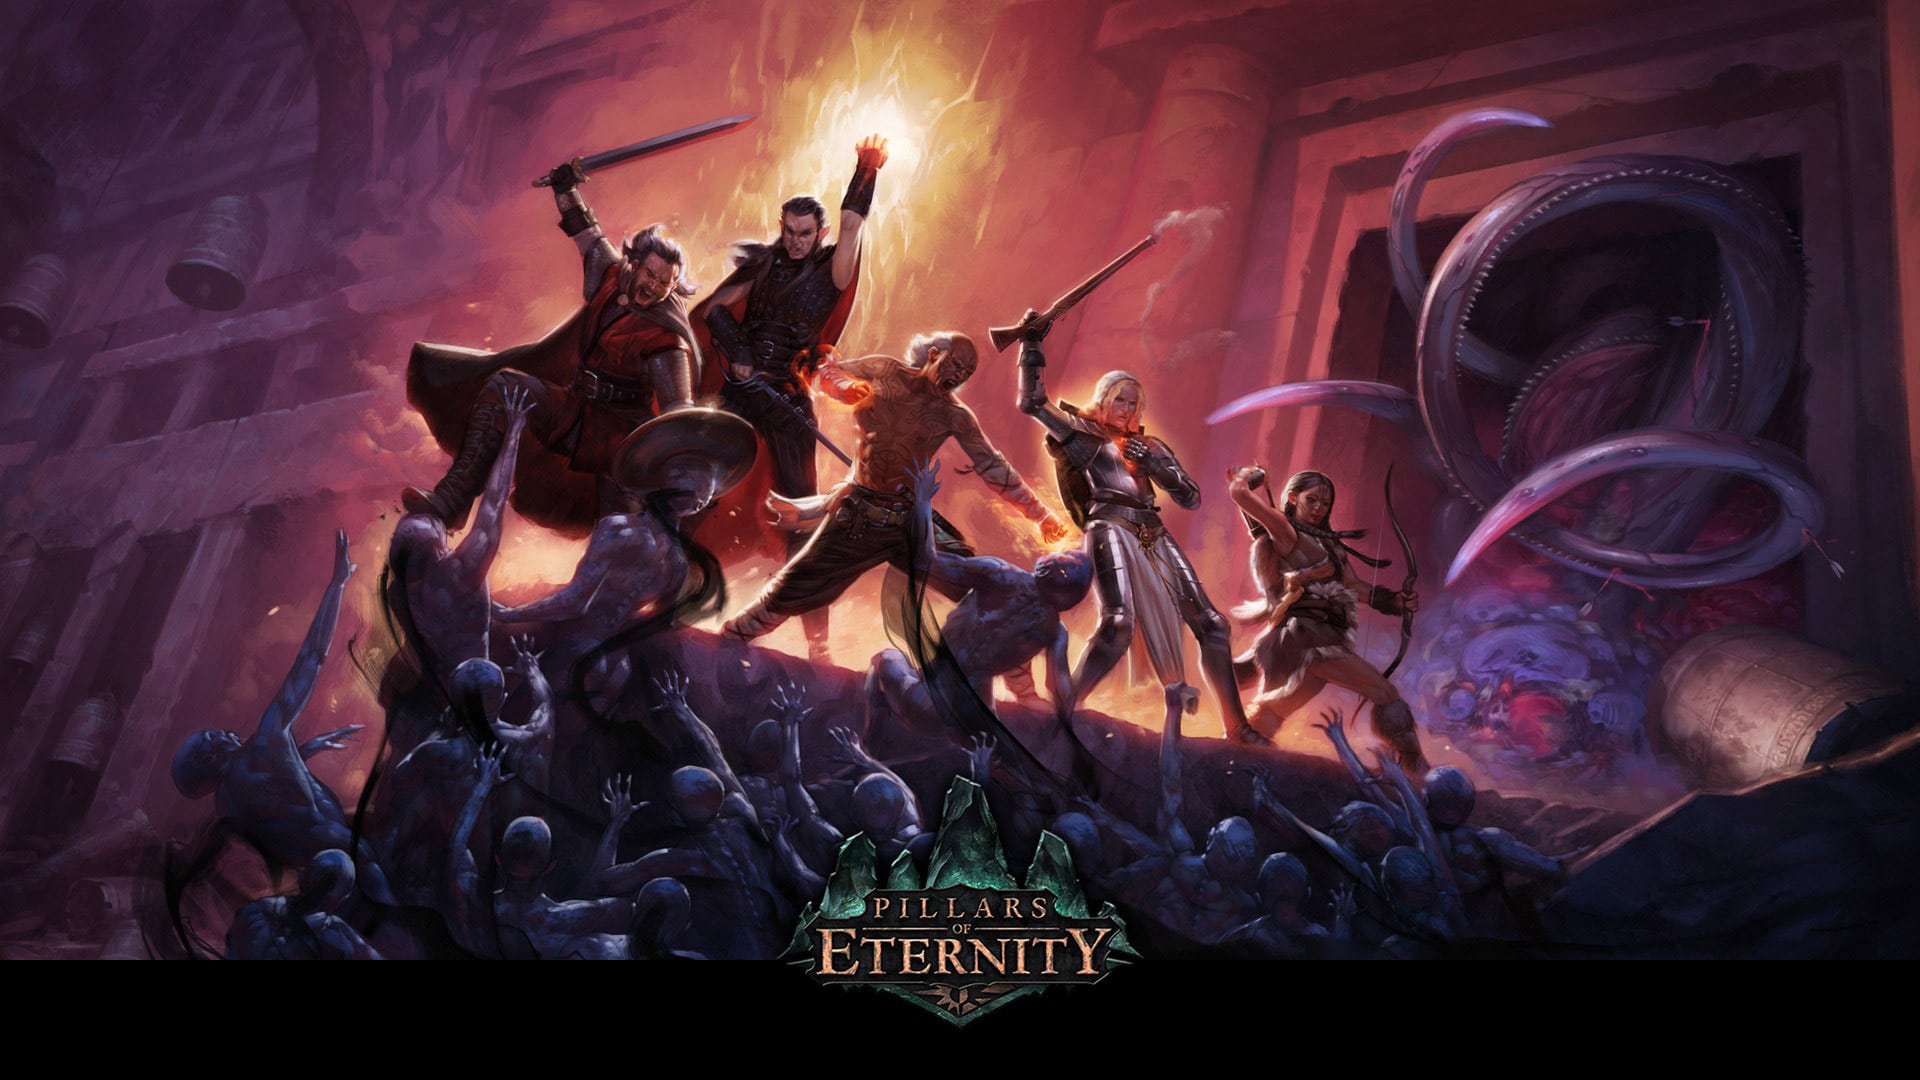 Pillars of Eternity System Requirements for PC (Min n Max)